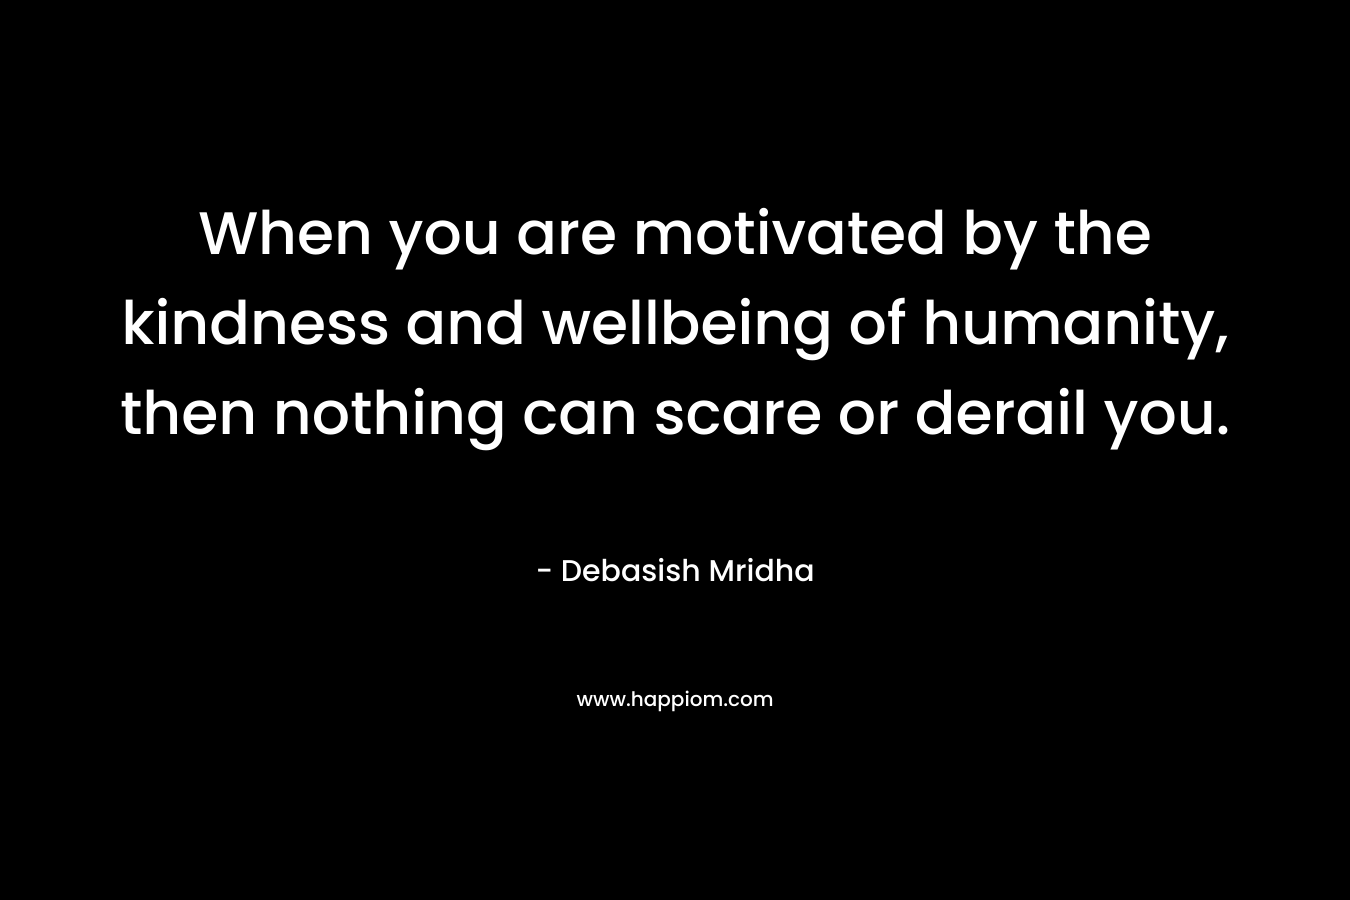 When you are motivated by the kindness and wellbeing of humanity, then nothing can scare or derail you. – Debasish Mridha